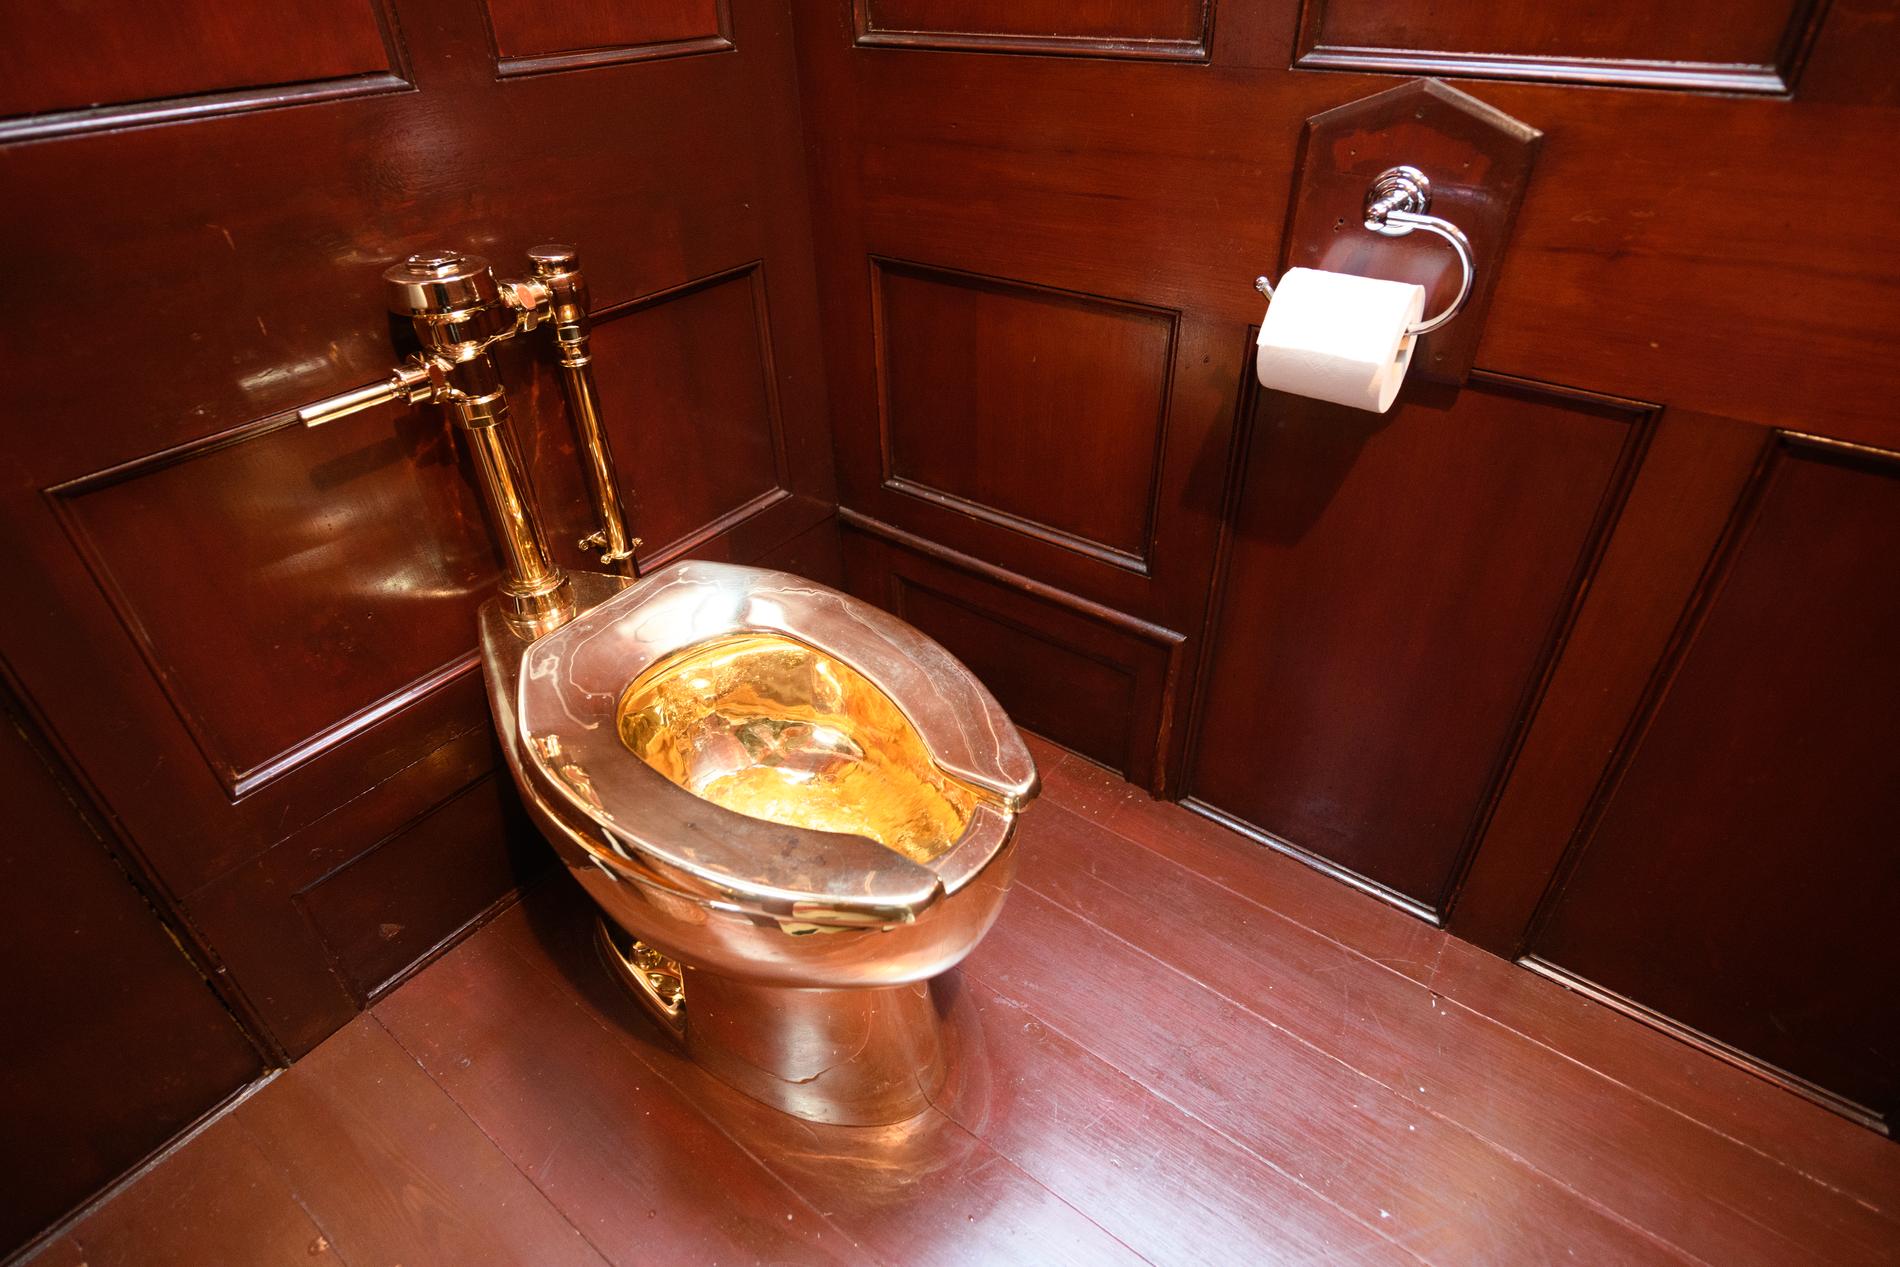 The Mysterious Disappearance of the $4.8 Million Gold Throne: Four Men Charged in the Blenheim Palace Toilet Heist